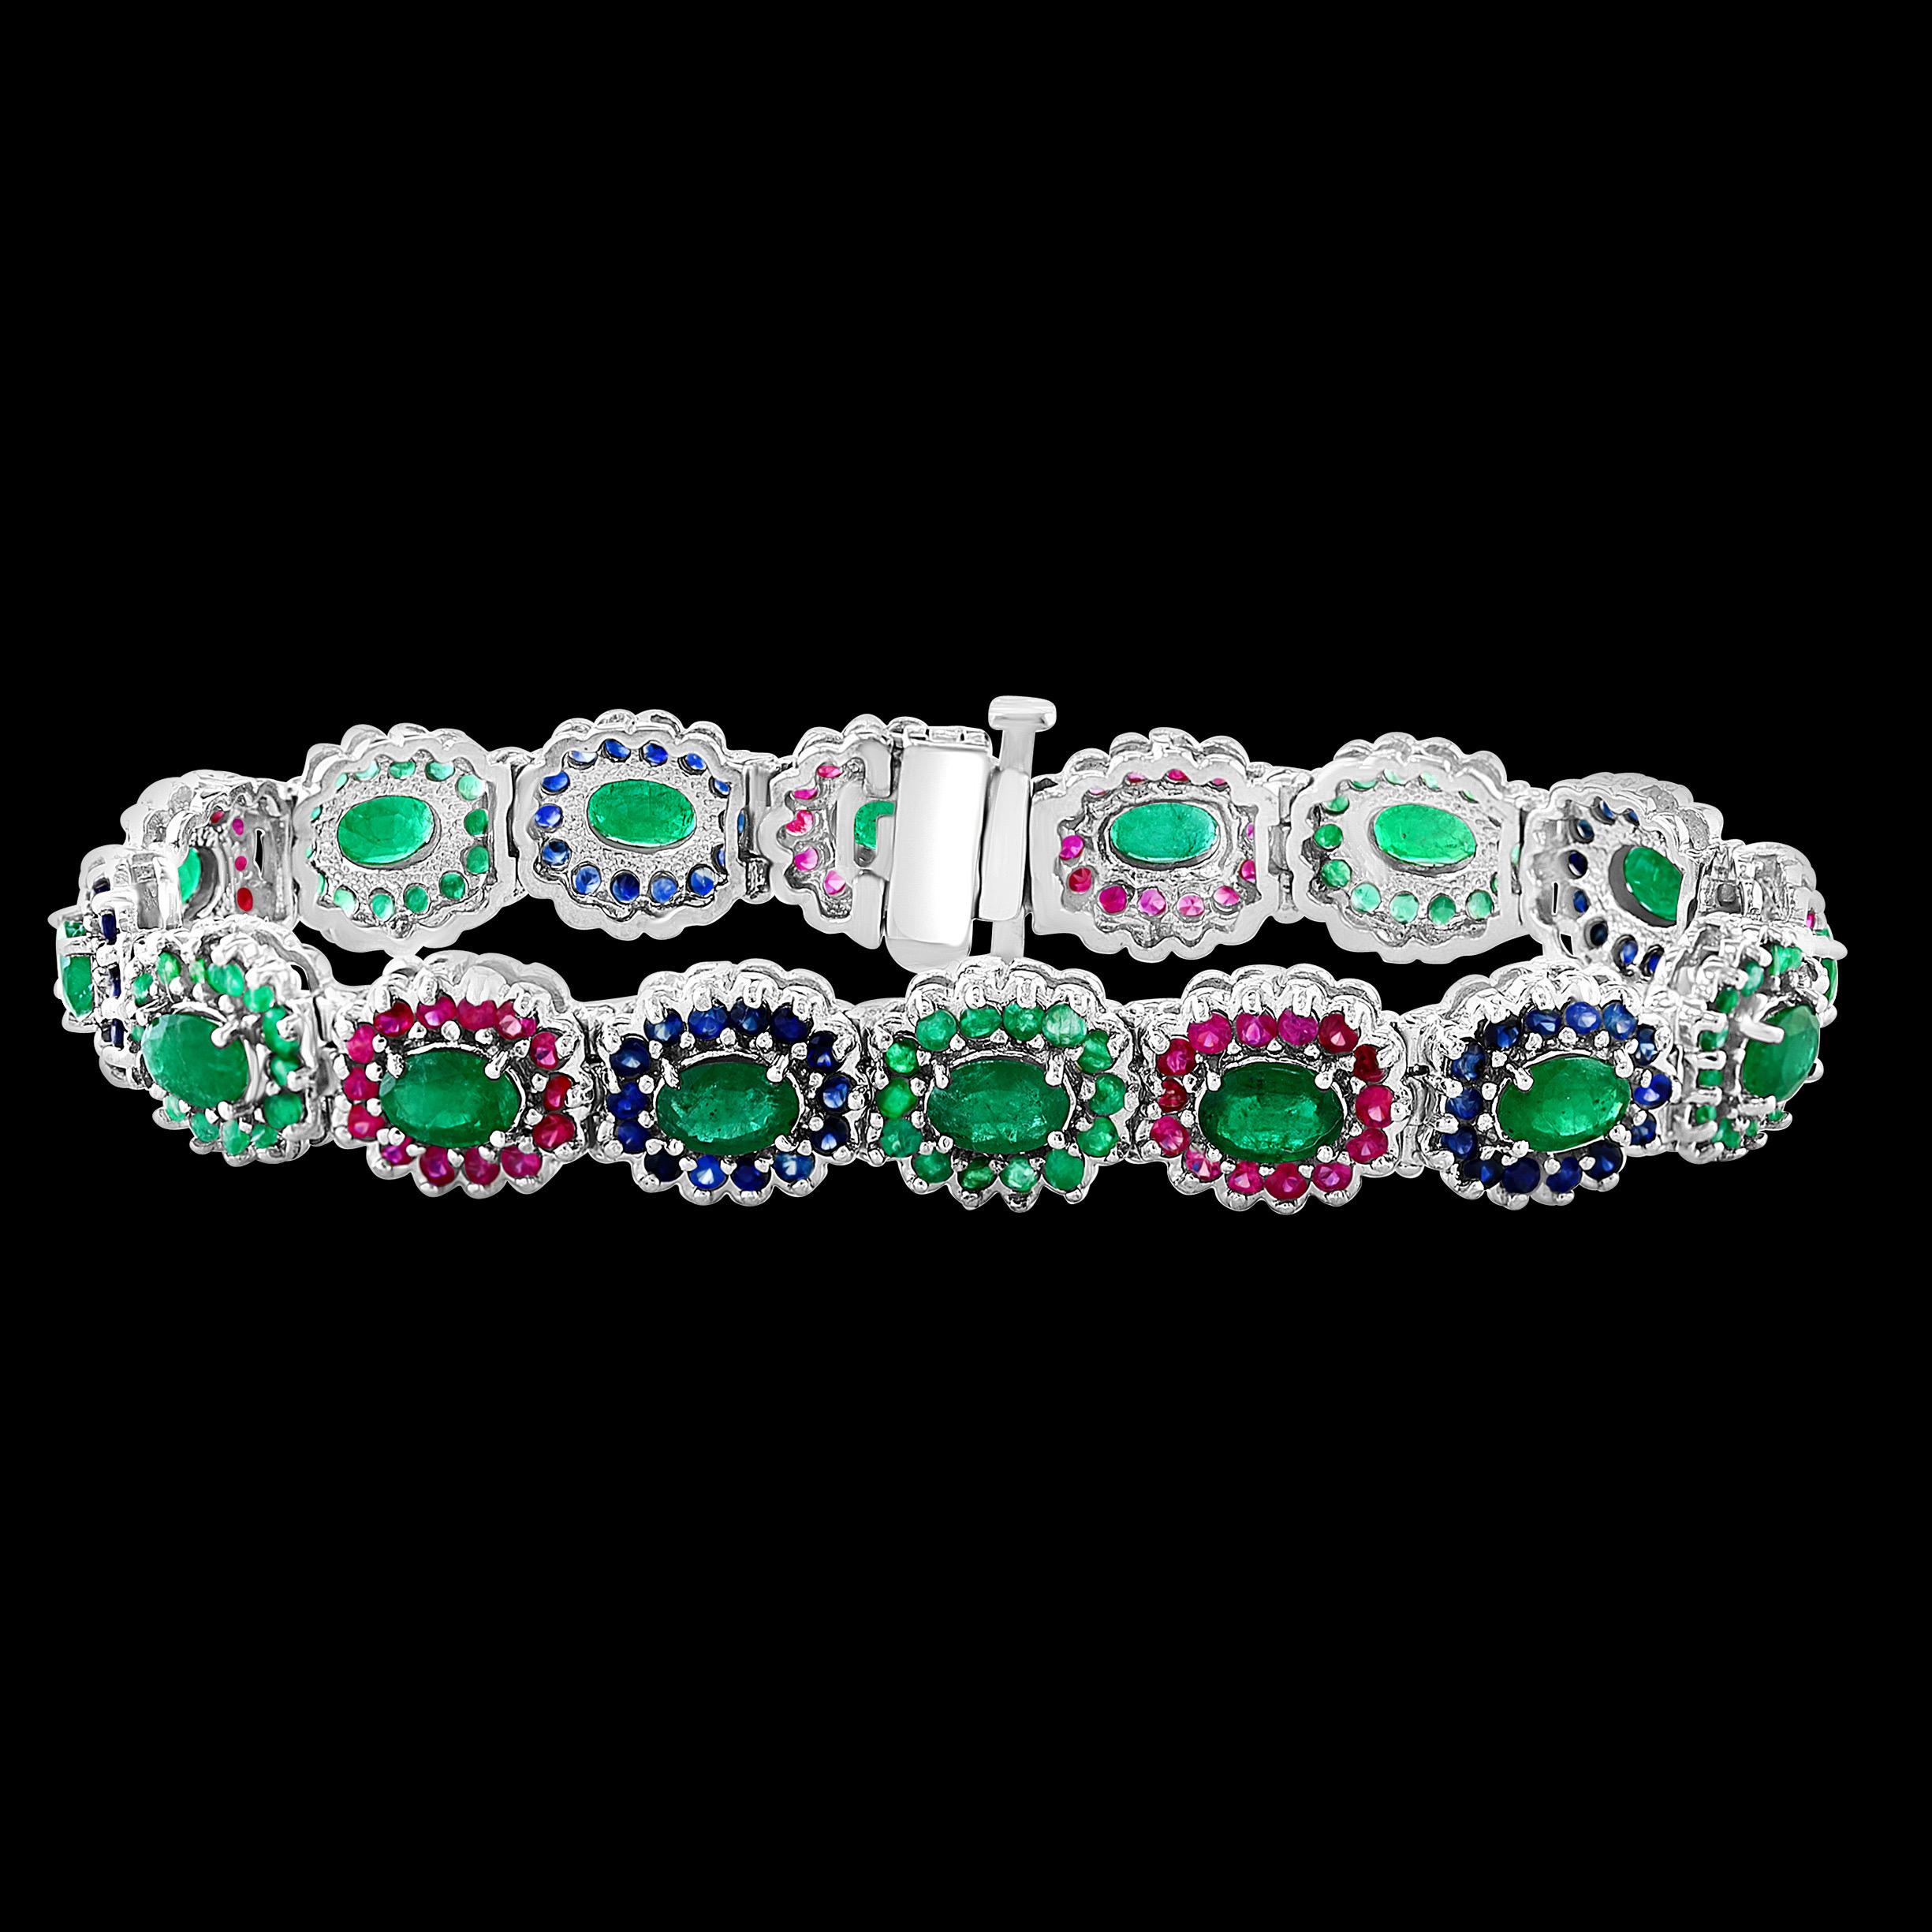 8 Ct Oval Cut Emerald & Ruby & Sapphire Tennis Bracelet 14 Kt White Gold 25.5Gm For Sale 13